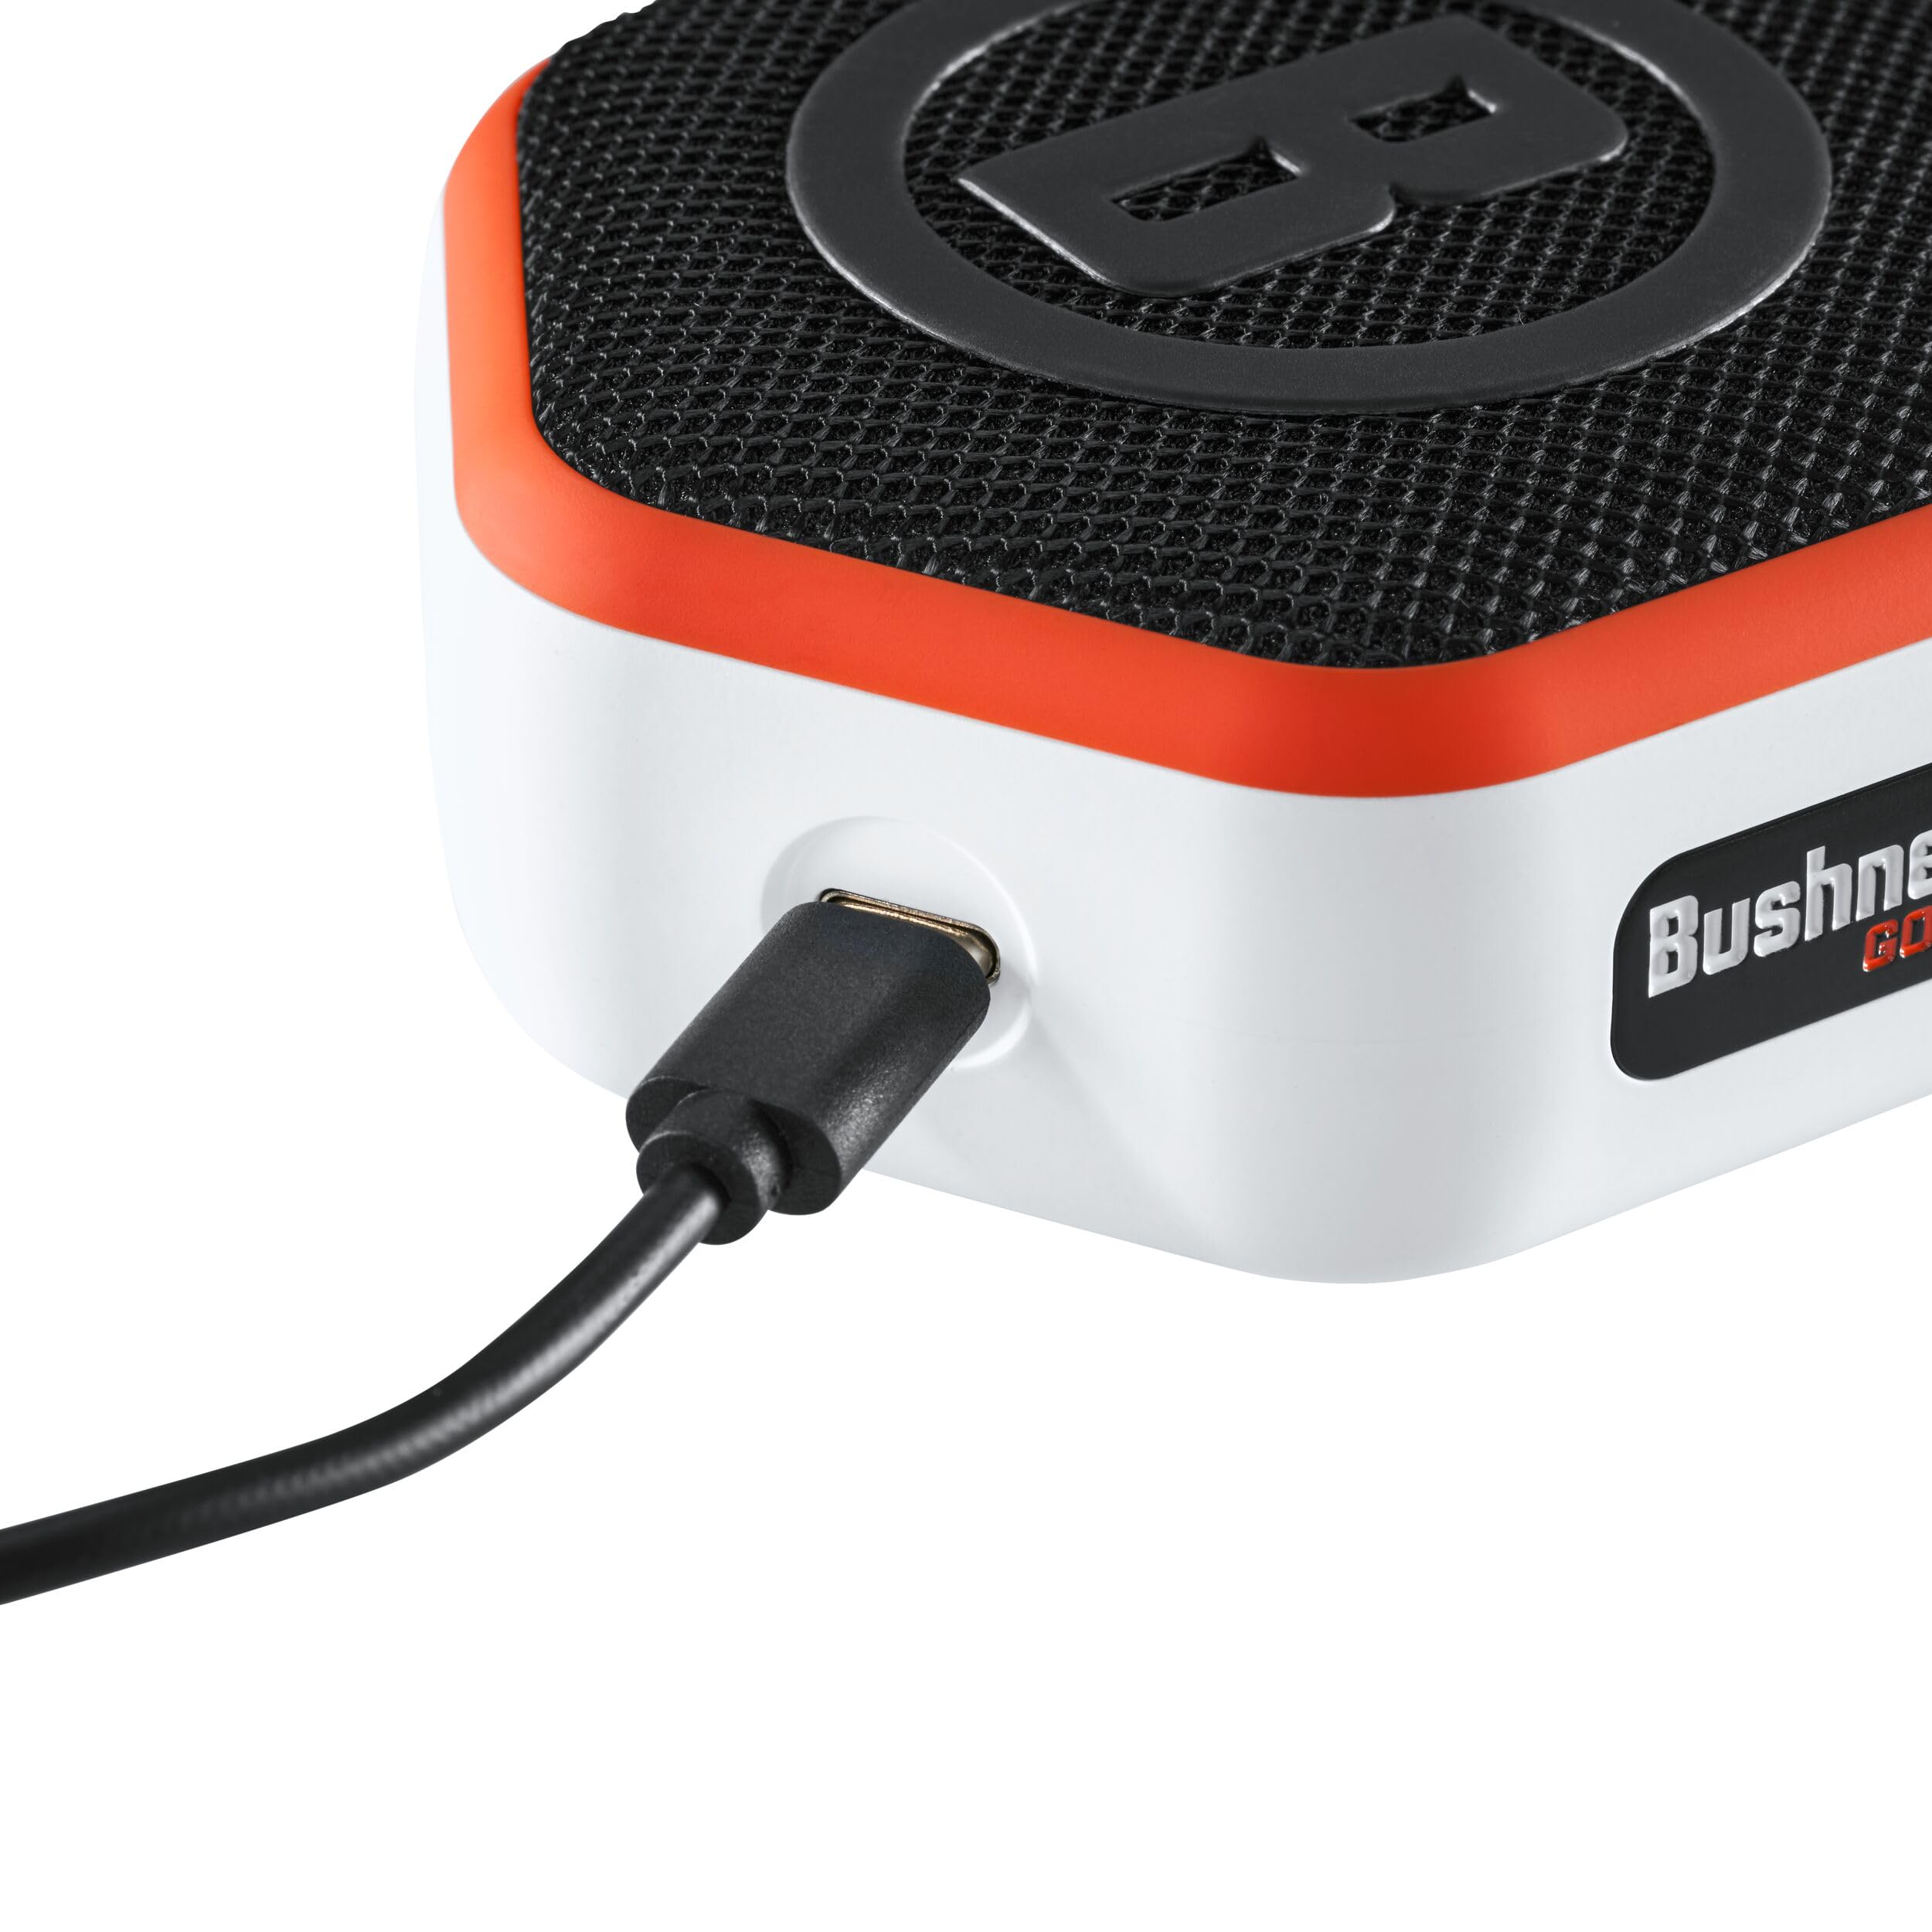 Bushnell Golf Wingman Mini GPS Speaker - Audible & Accurate Distances, Multiple Mounting Options for Cart or Walking (White/Orange)